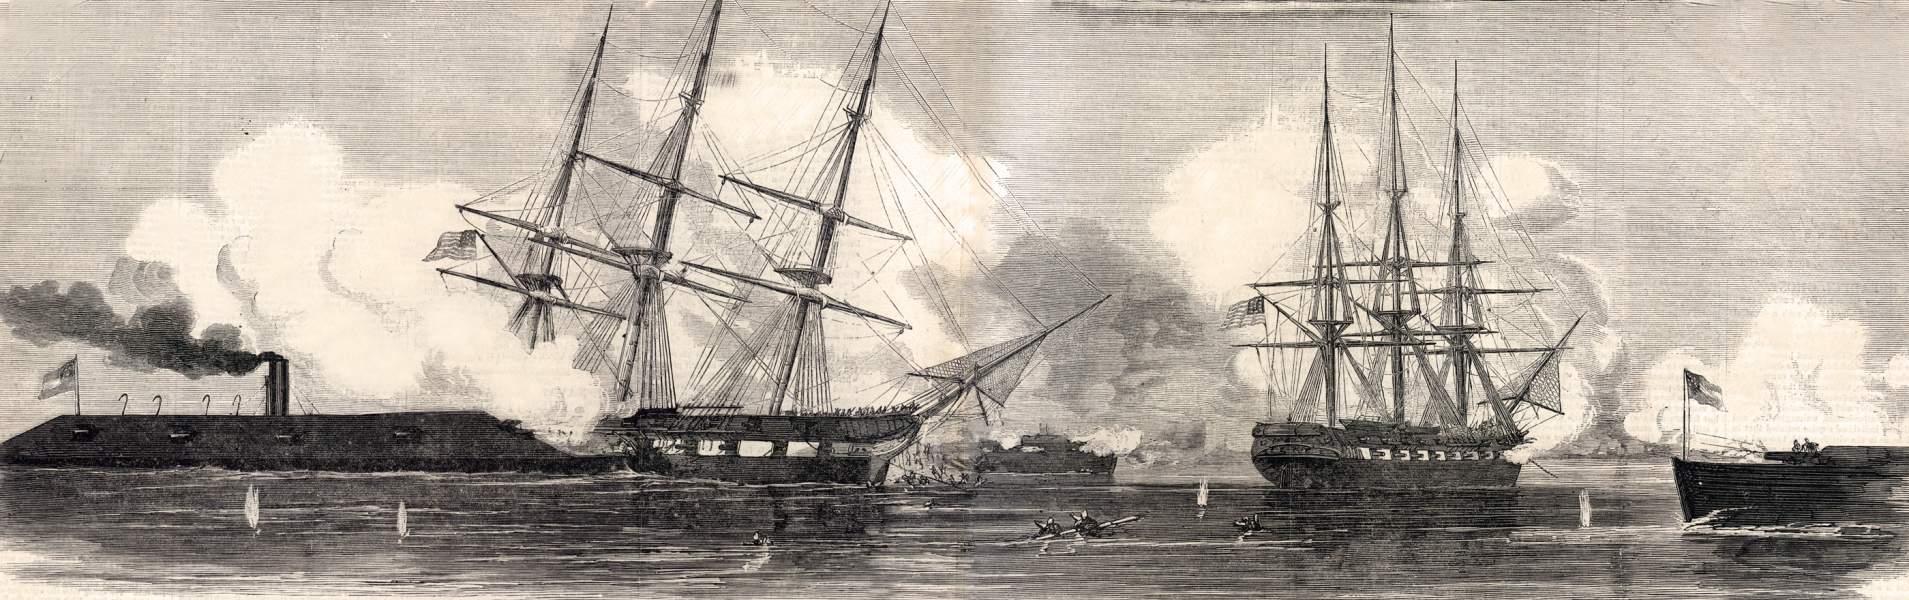 C.S.S. Virginia in action against the U.S.S. Cumberland off Newport News, March 8, 1862, artist's impression, zoomable image